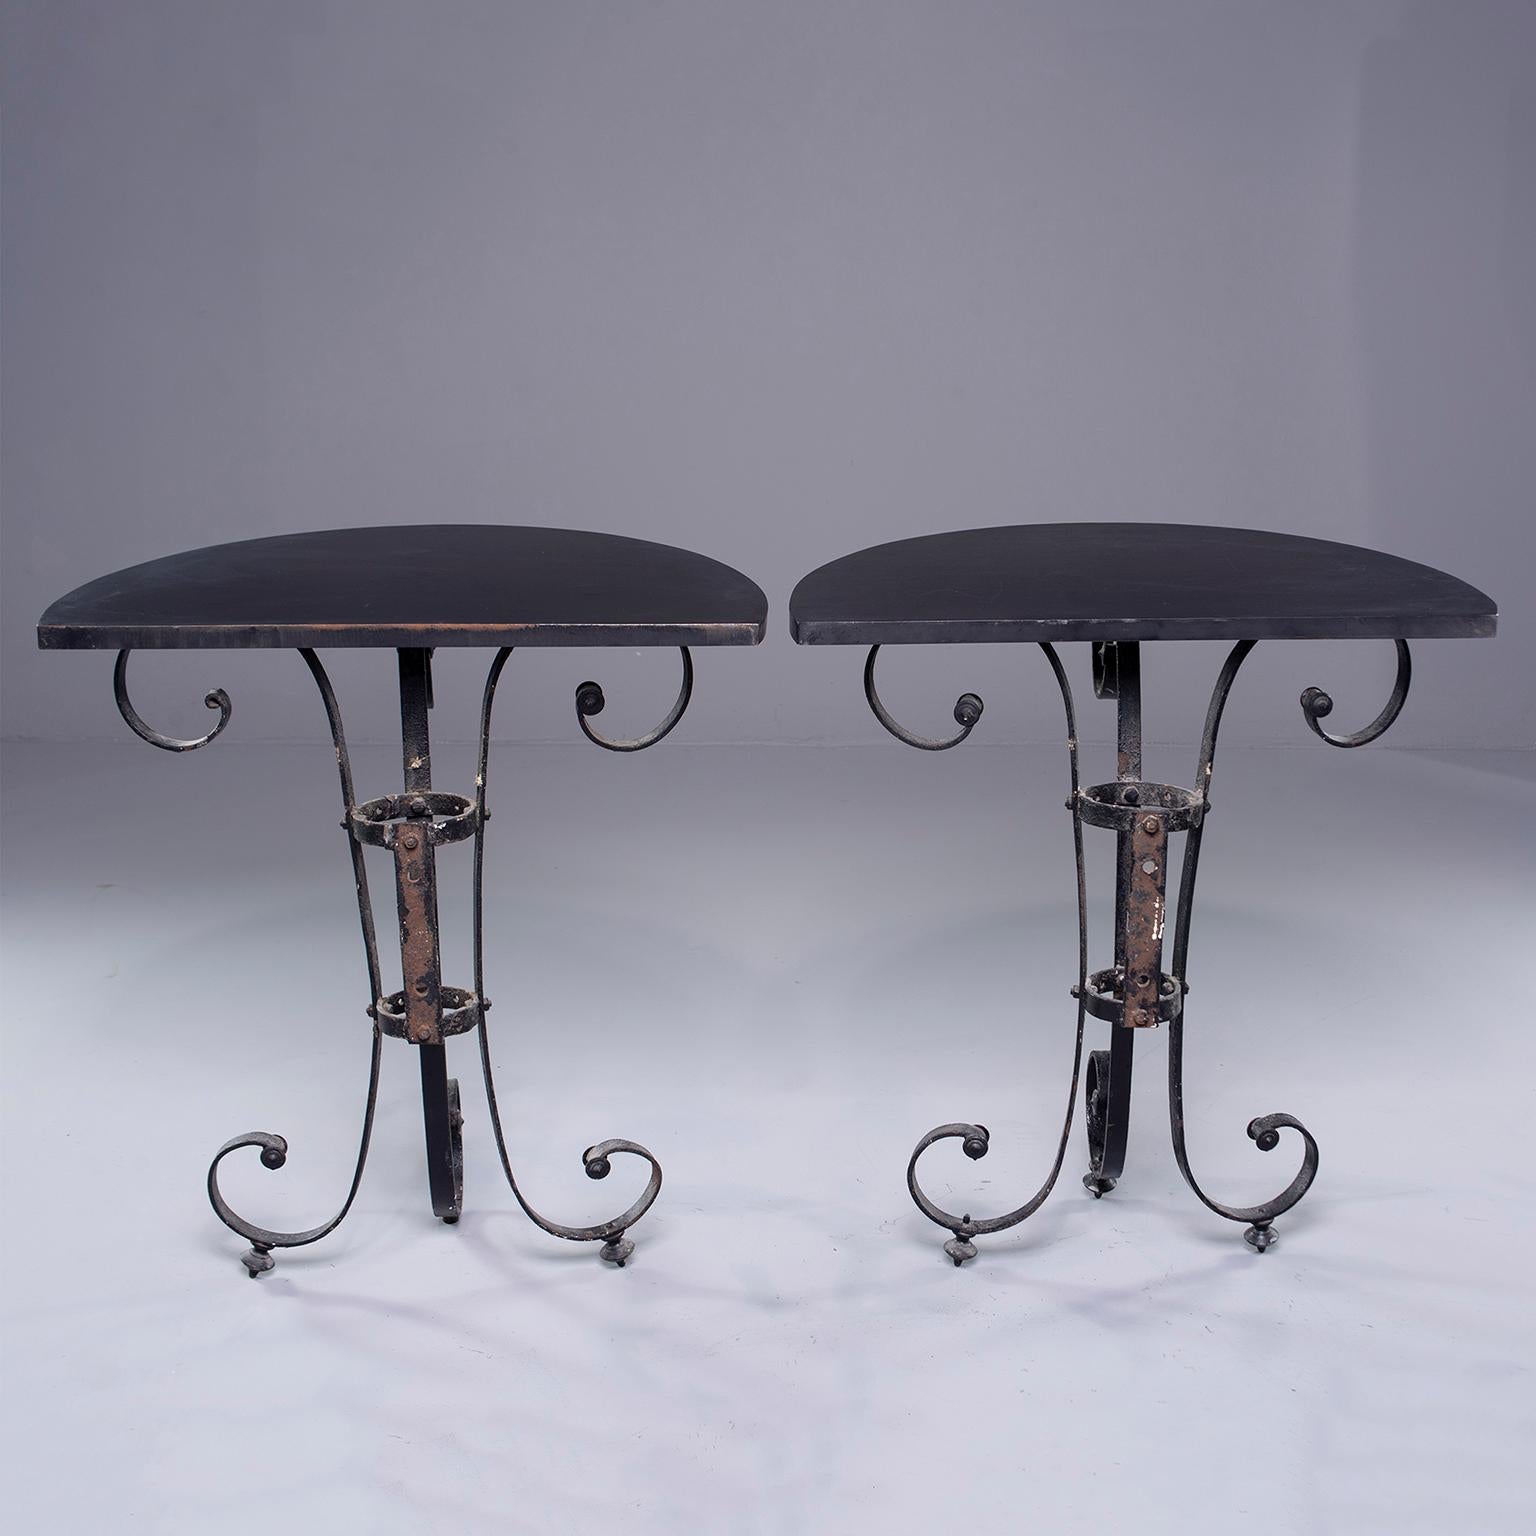 Pair of Demilune Consoles with Italian Iron Candelabra Base and Black Metal Tops (Metall)